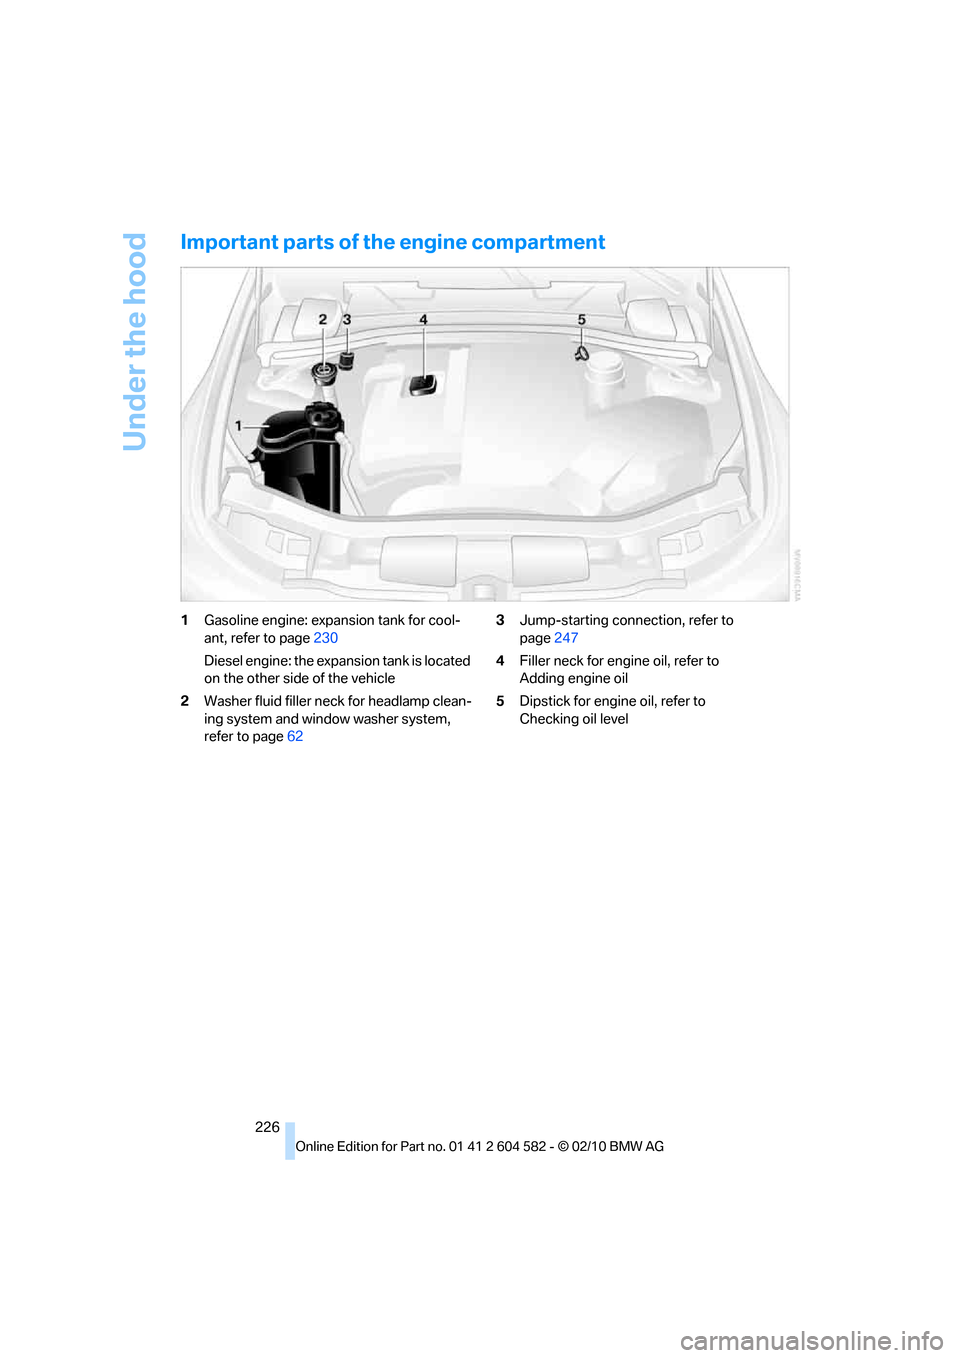 BMW 335D TOURING 2011 E91 Owners Manual Under the hood
226
Important parts of the engine compartment
1Gasoline engine: expansion tank for cool-
ant, refer to page230
Diesel engine: the expansion tank is located 
on the other side of the veh